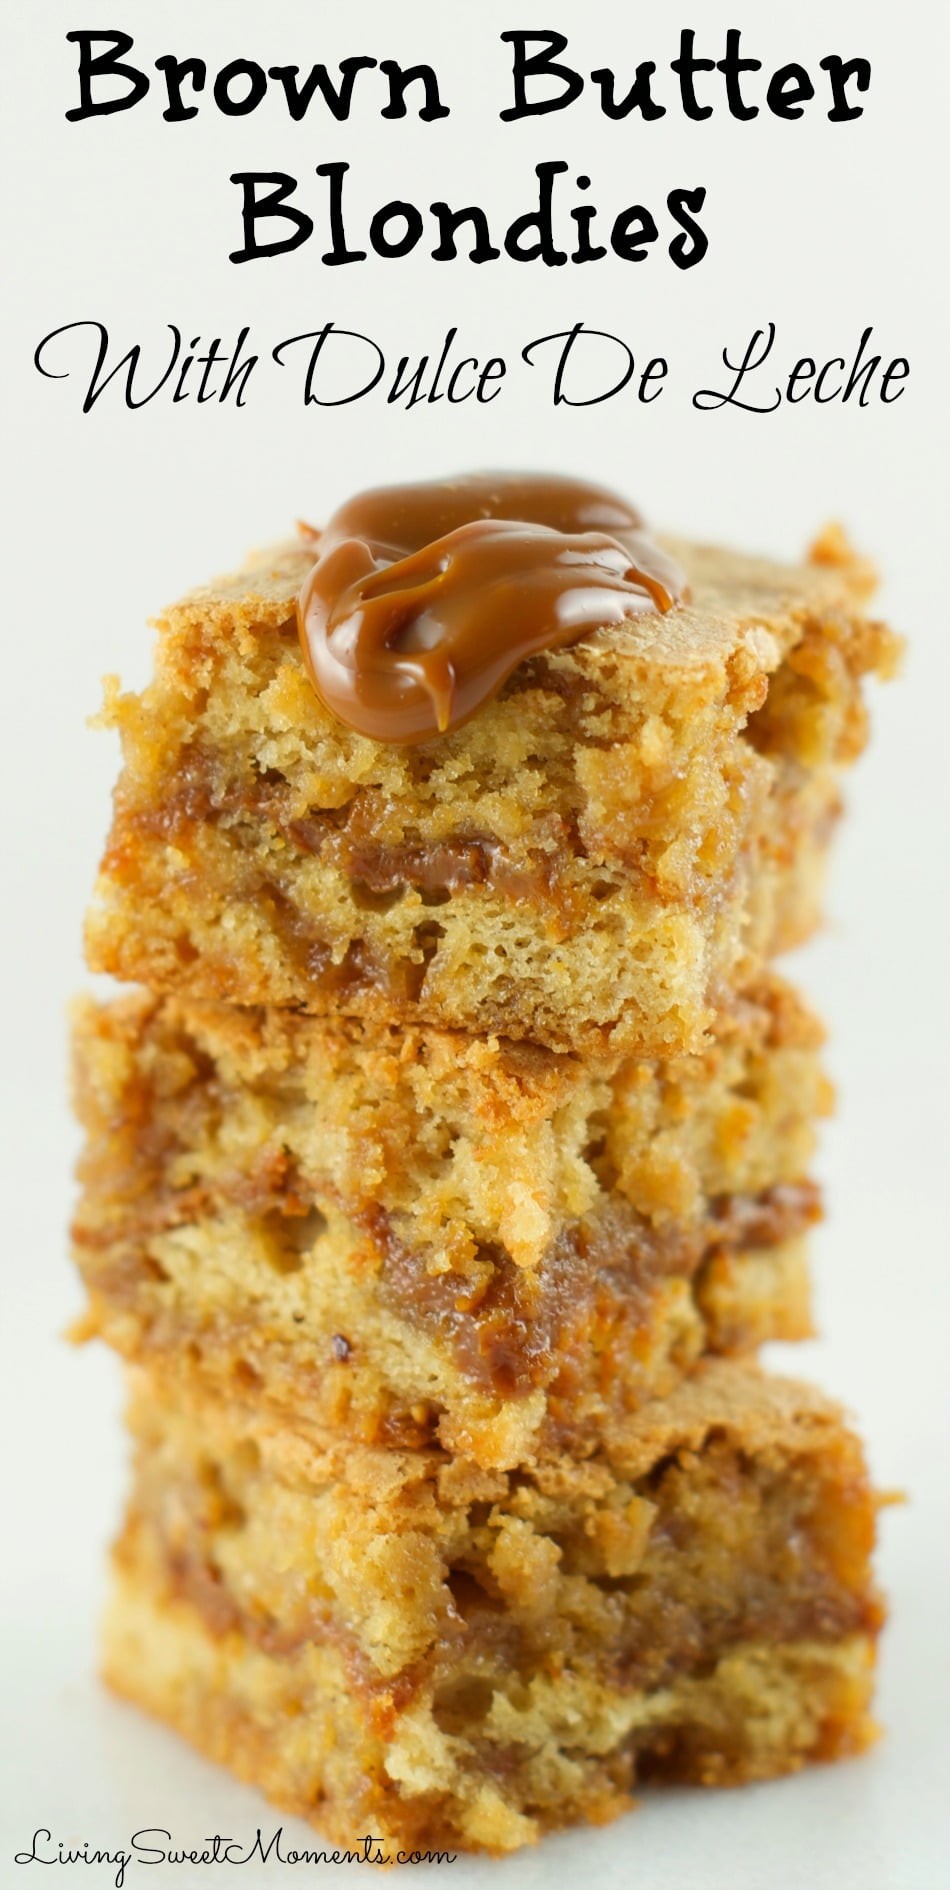 Brown Butter Blondies With Dulce De Leche - so delicious and irresistible. Butterscoth blondies with a creamy dulce de leche center. The perfect decadent dessert.